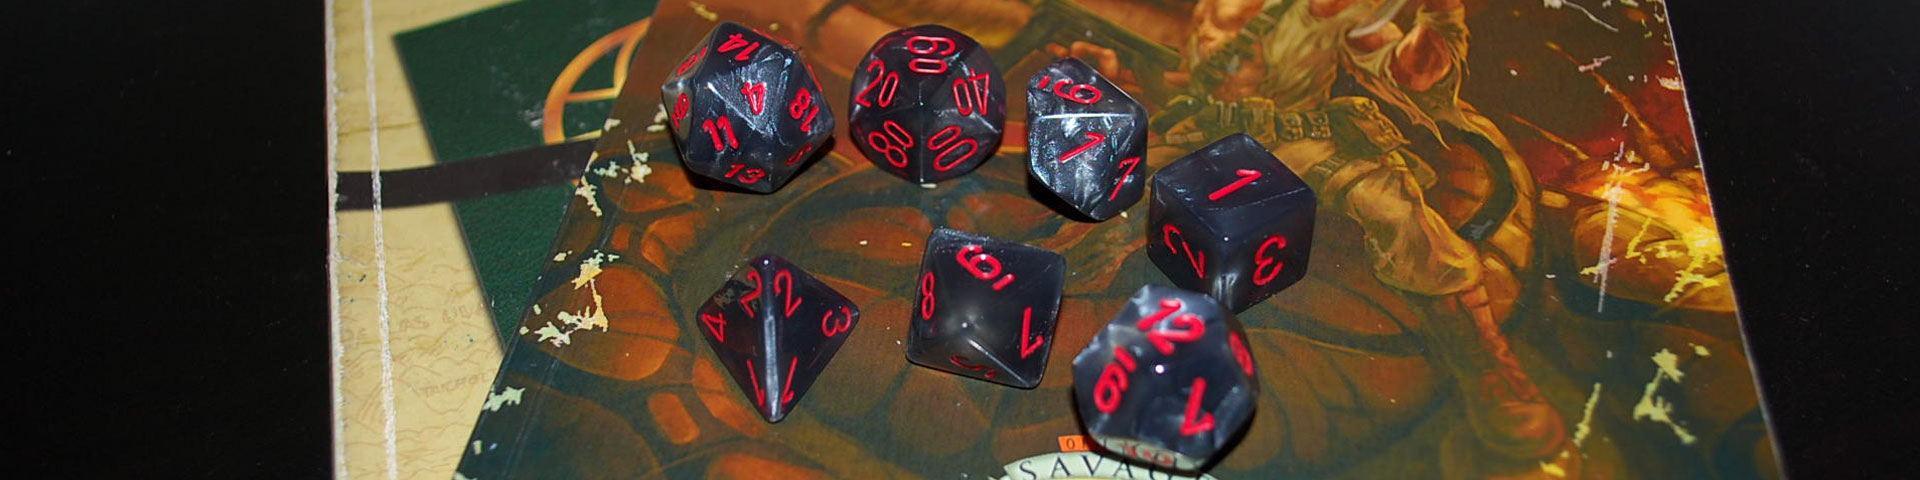 Black and grey dice with red numbers sit on top of role-playing game source books.